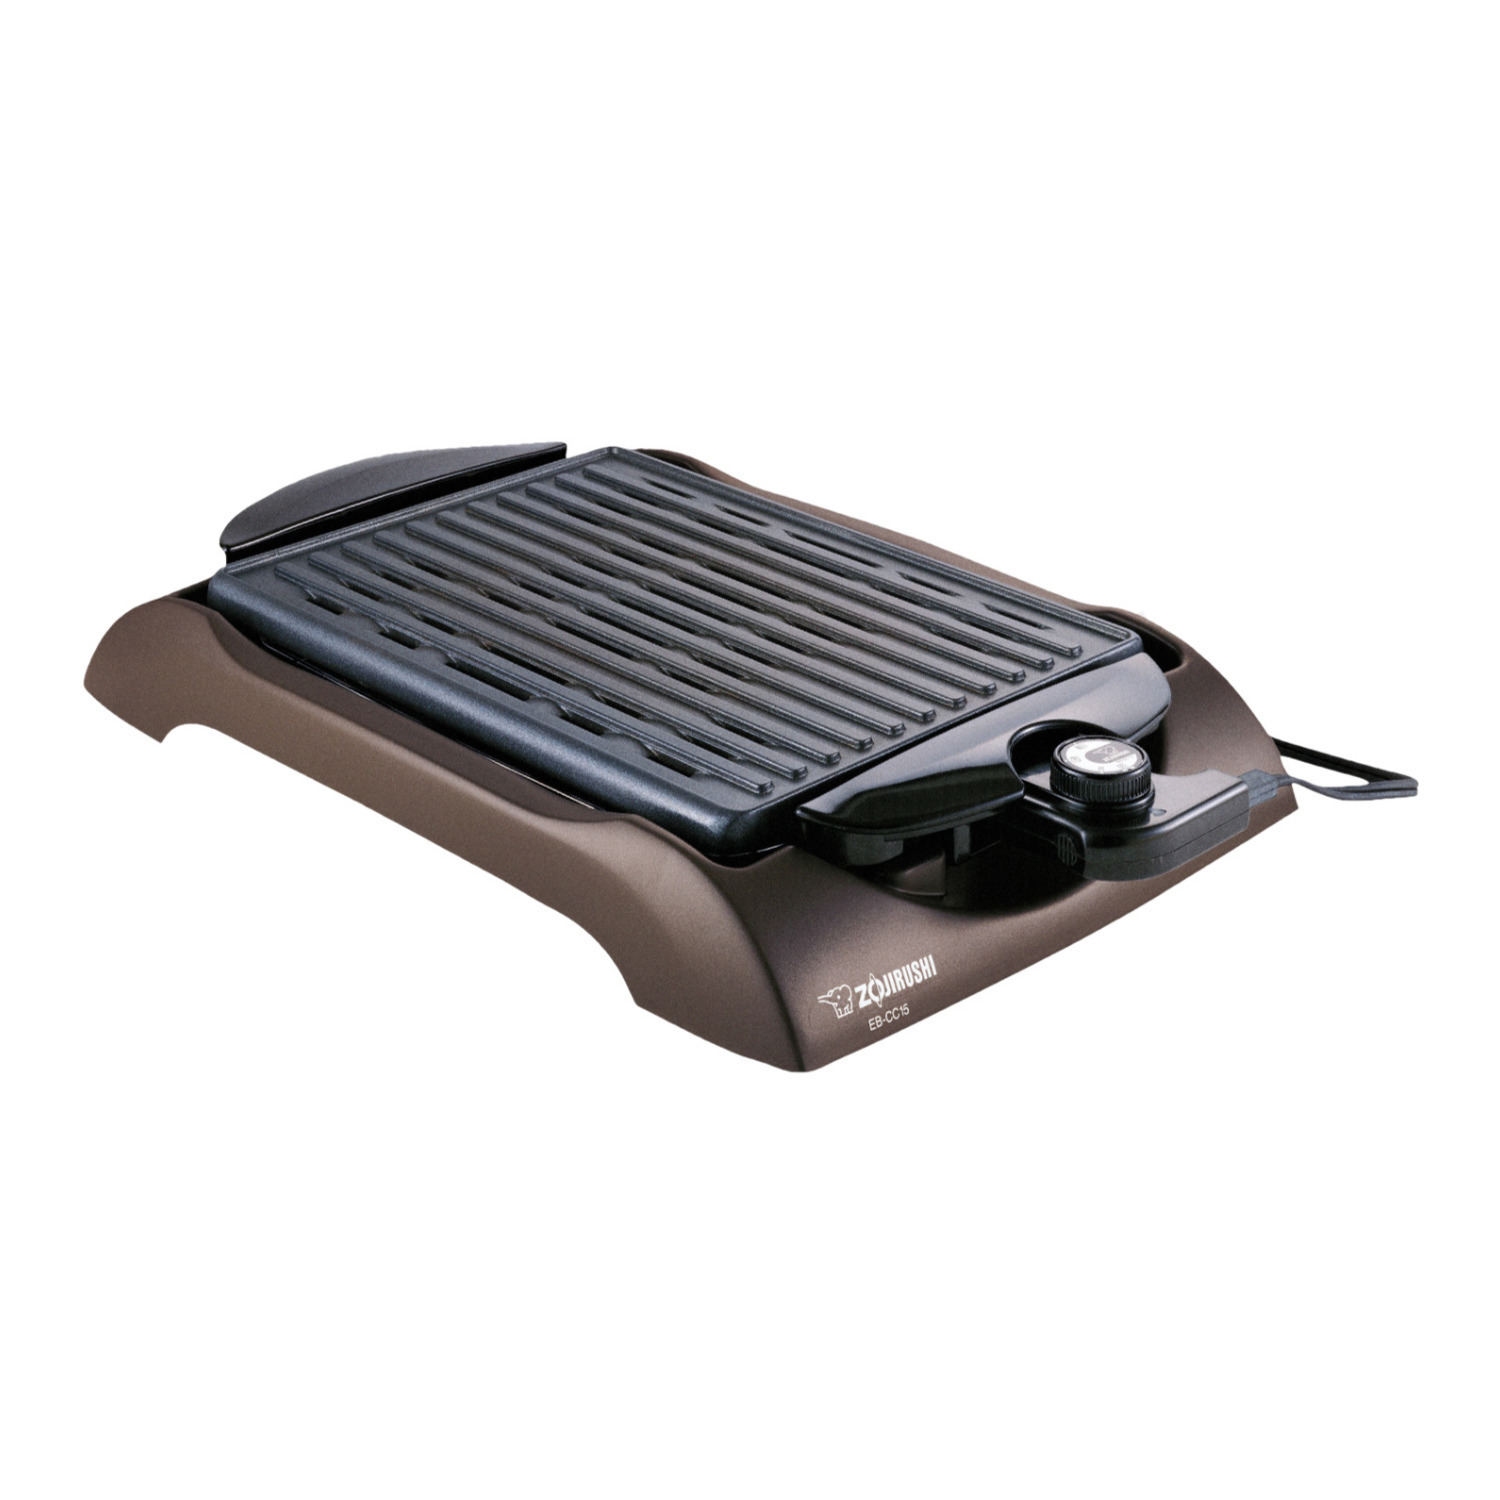 Zojirushi EB-CC15 Indoor Electric Grill with Grill Station - image 4 of 7